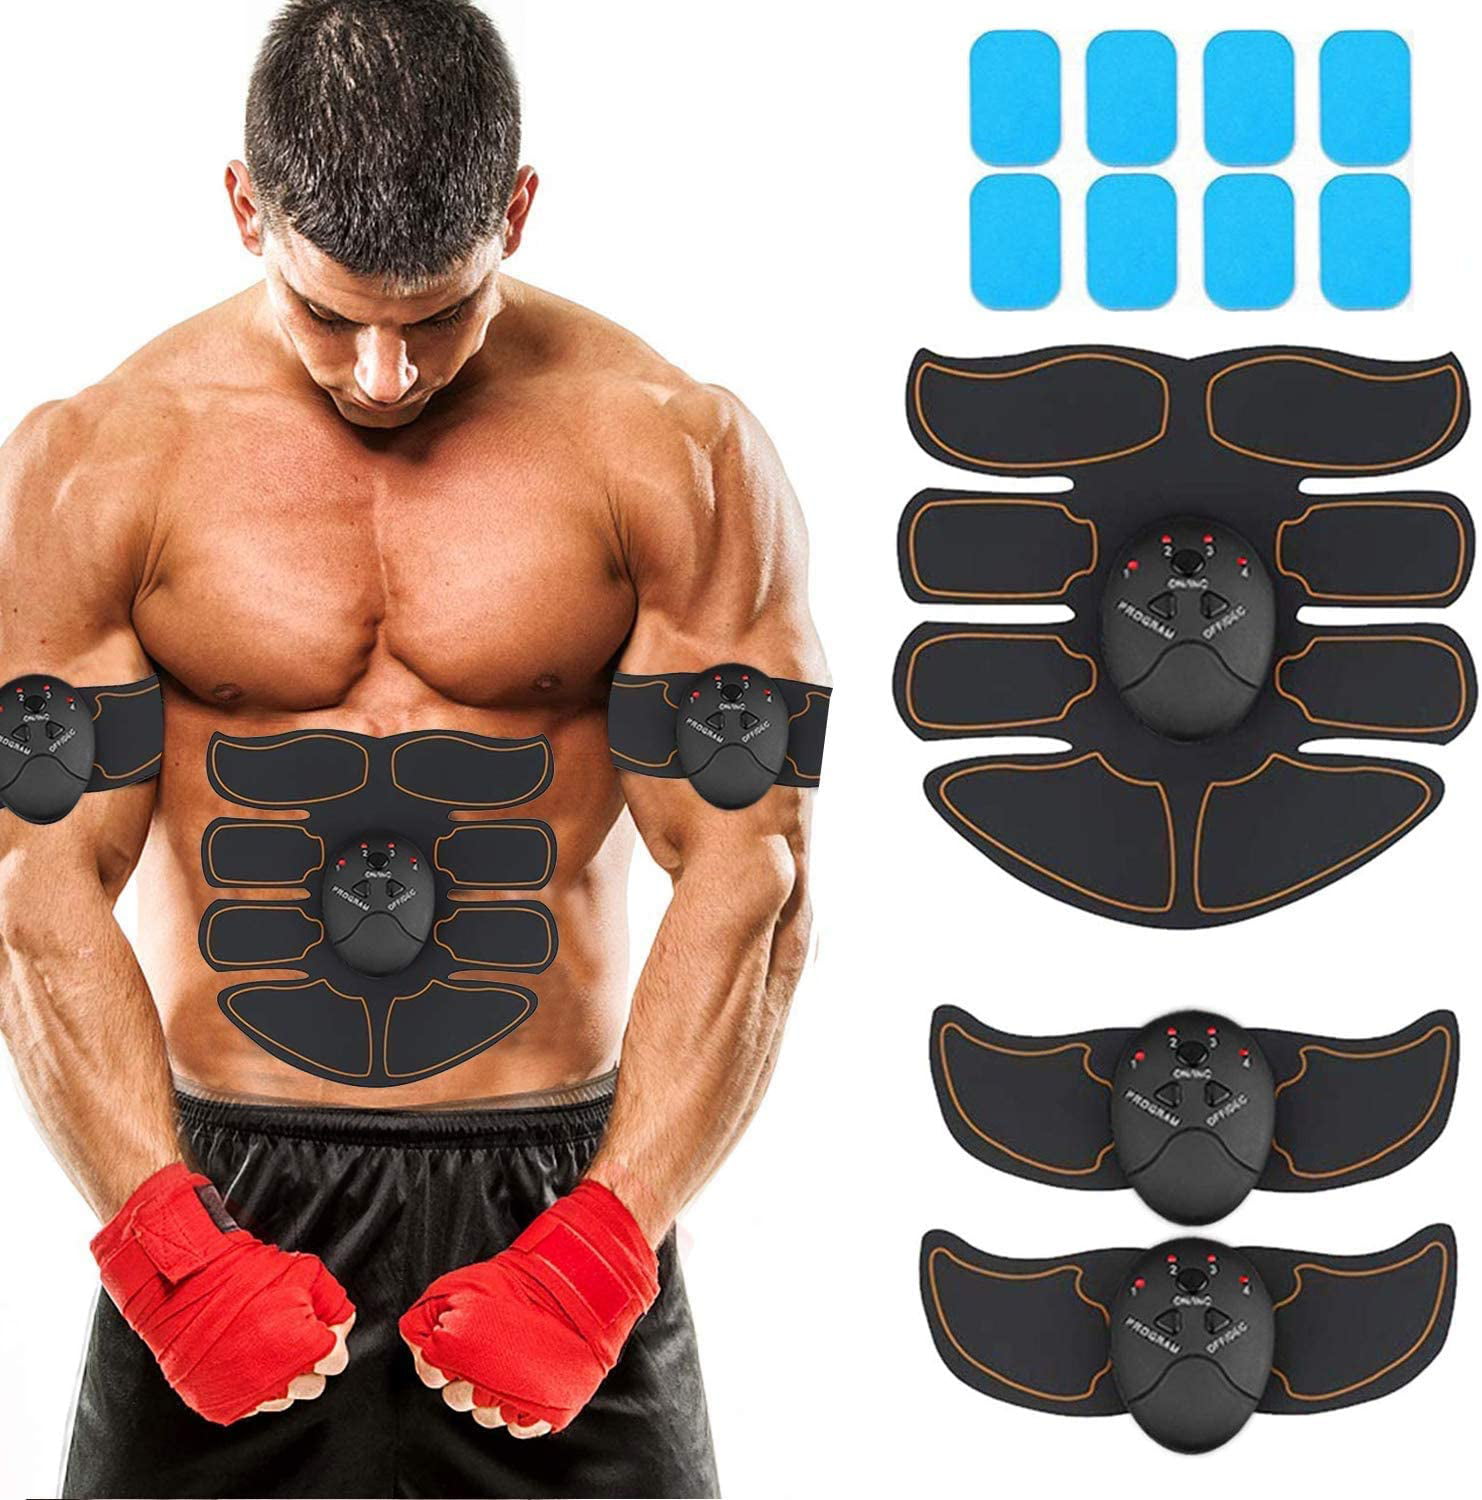 Professional EMS Muscle Stimulator Abs Trainer Exercise Equipment Home Fitness 